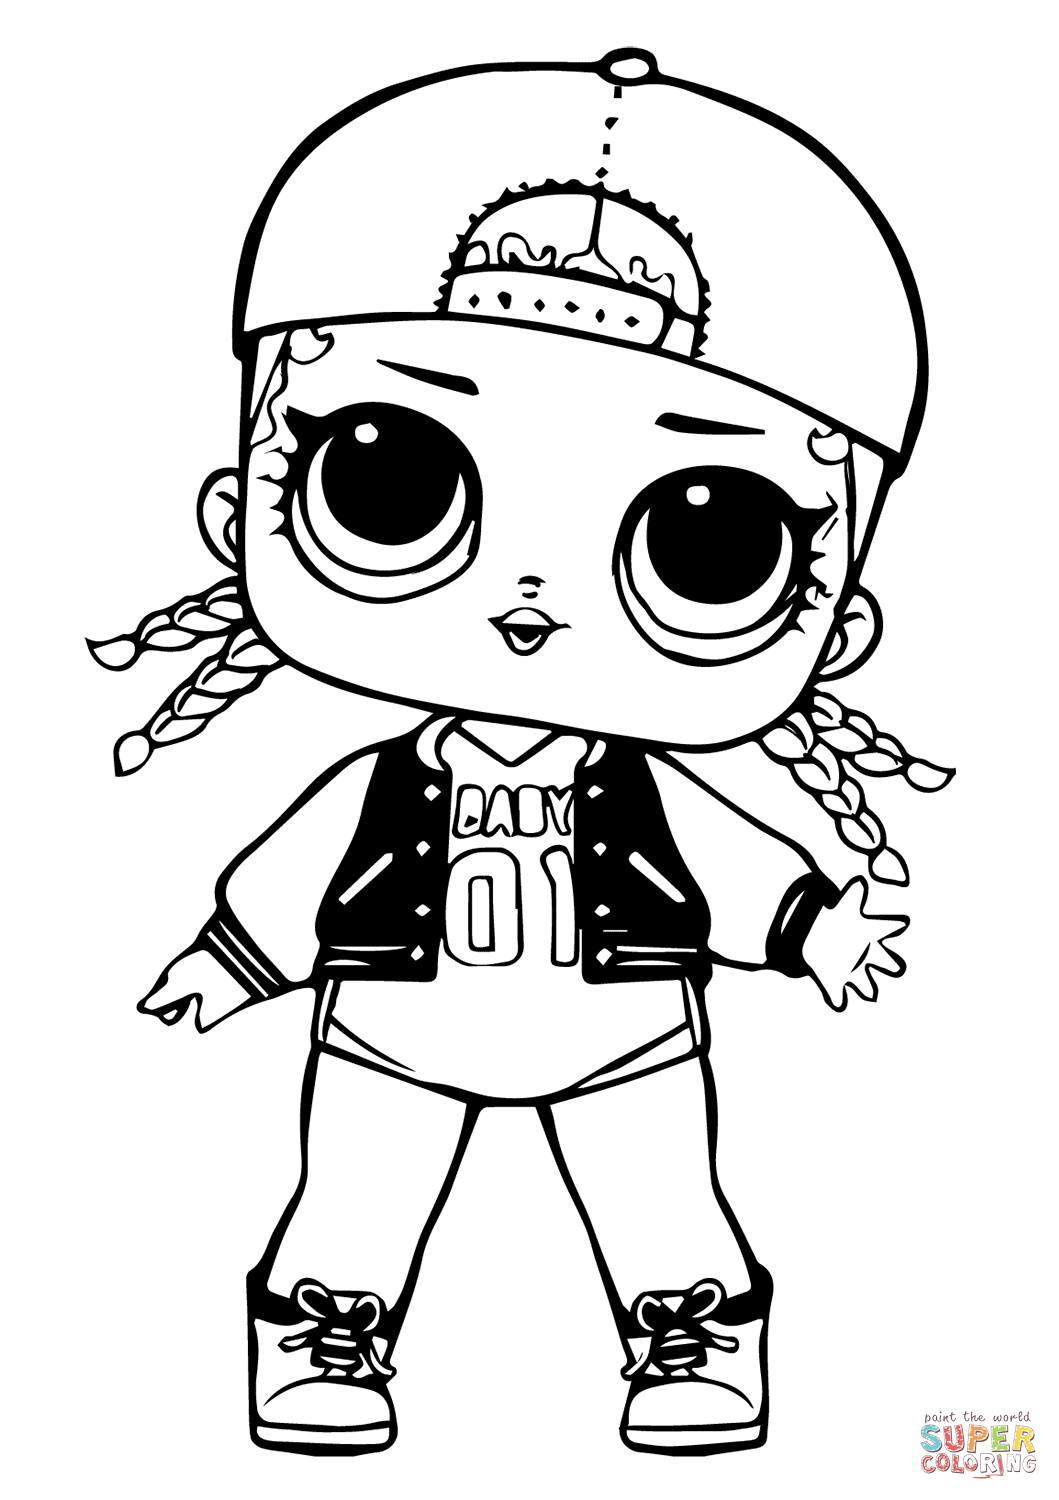 LOL Doll MC Swag coloring page | Free Printable Coloring Pages